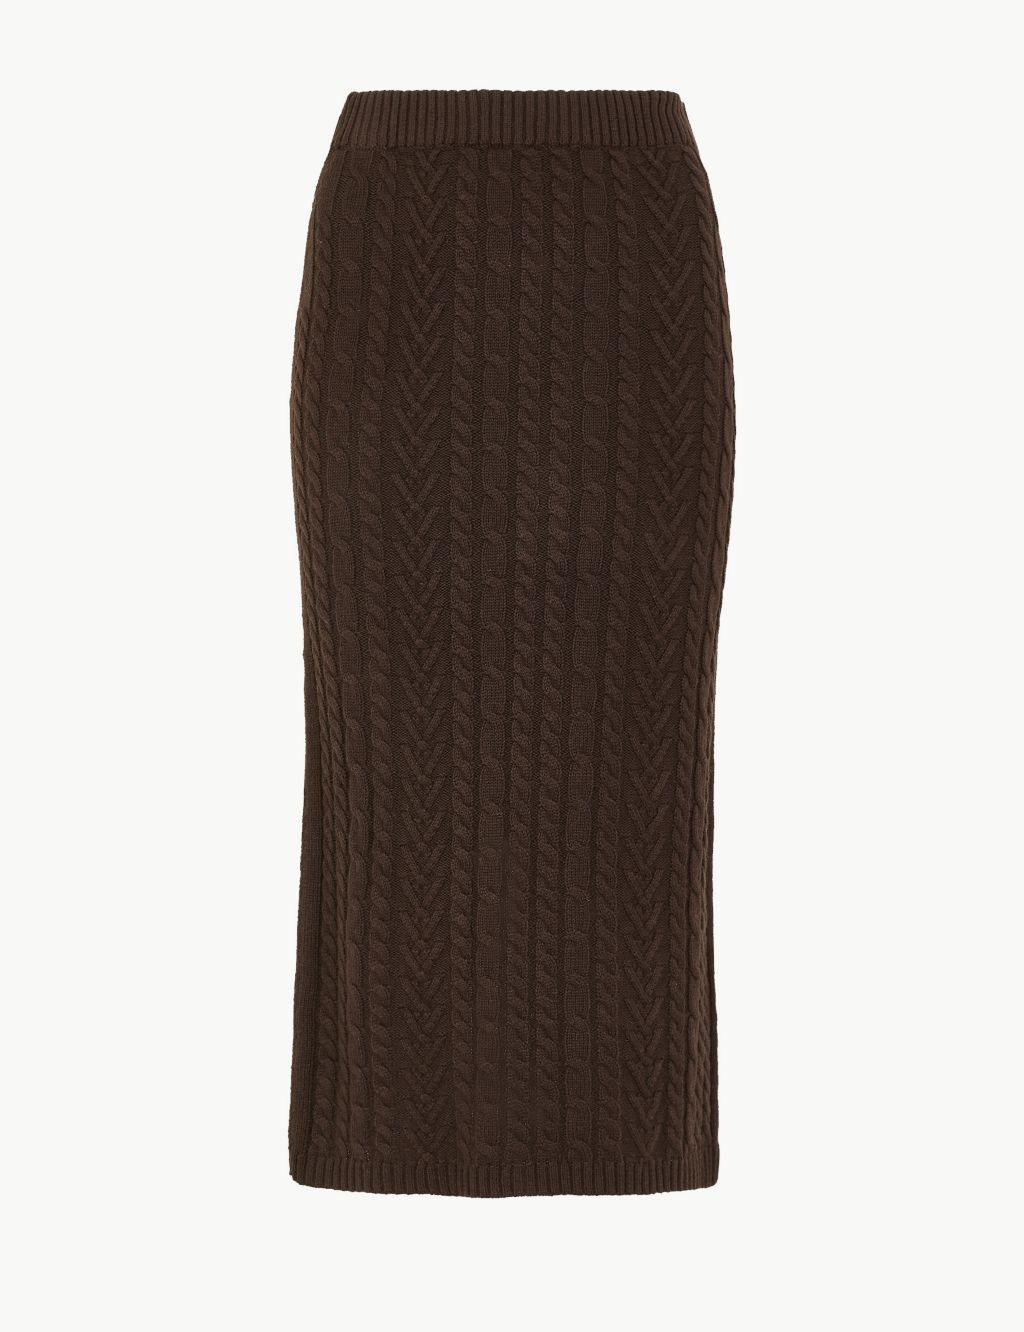 Knitted Midi Skirt | M&S Collection | M&S